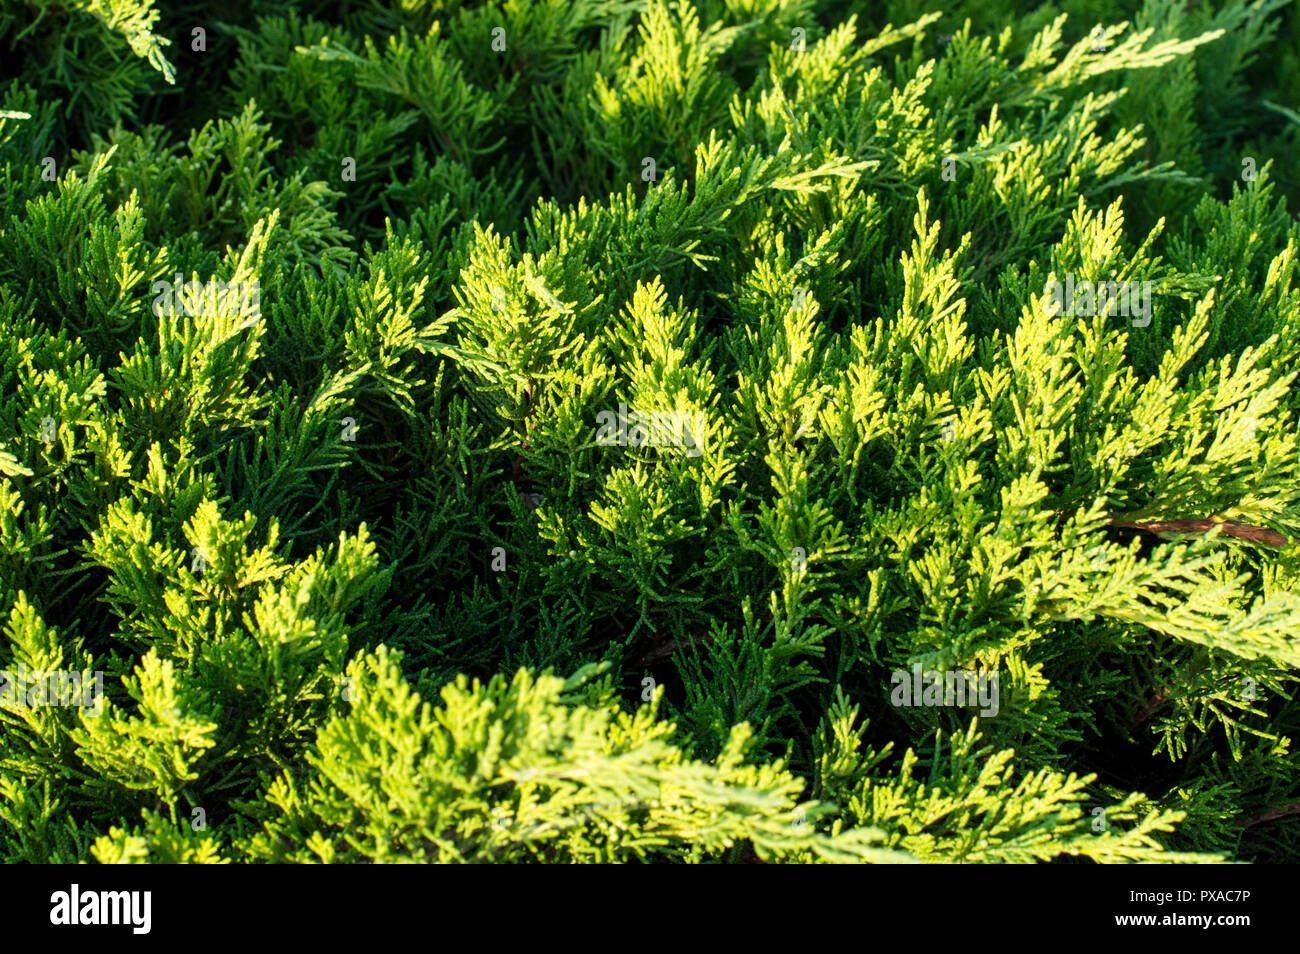 Thuja, Thujia is the genus of the gymnosperm conifers of the family Cypressaceae. Stock Photo